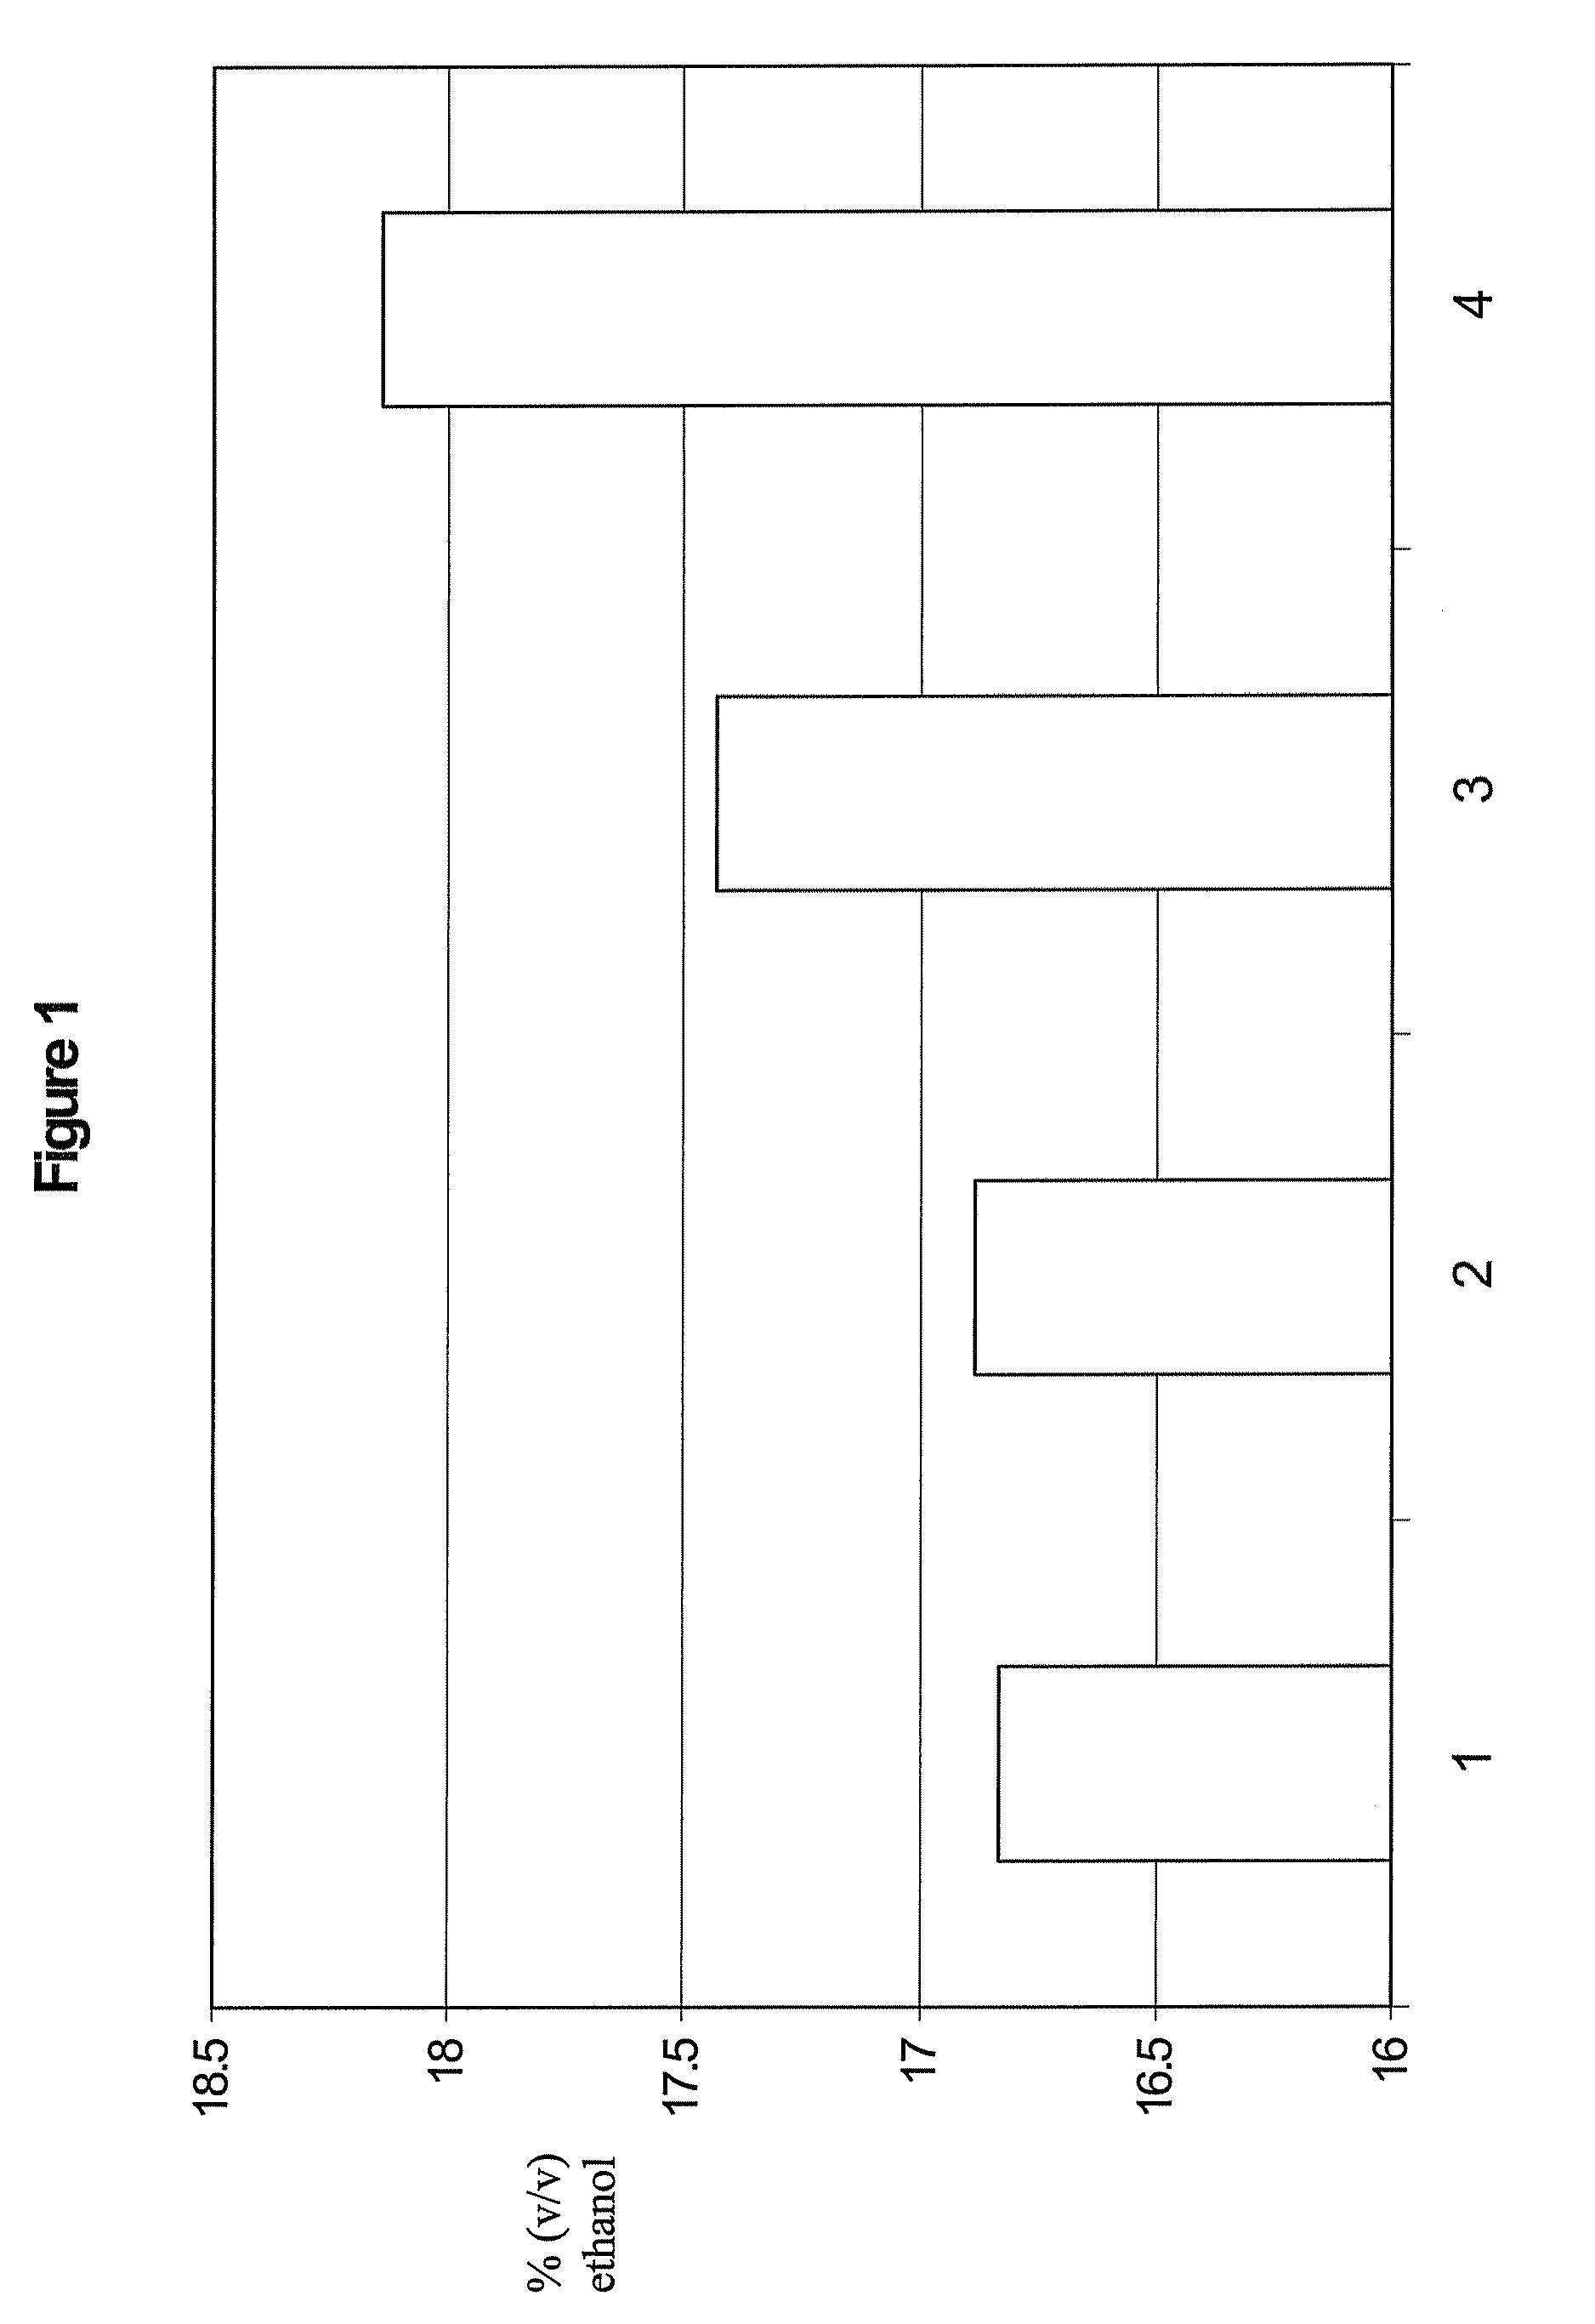 Enzyme compositions comprising a glucoamylase, an acid stable alpha amylase, and an acid fungal protease